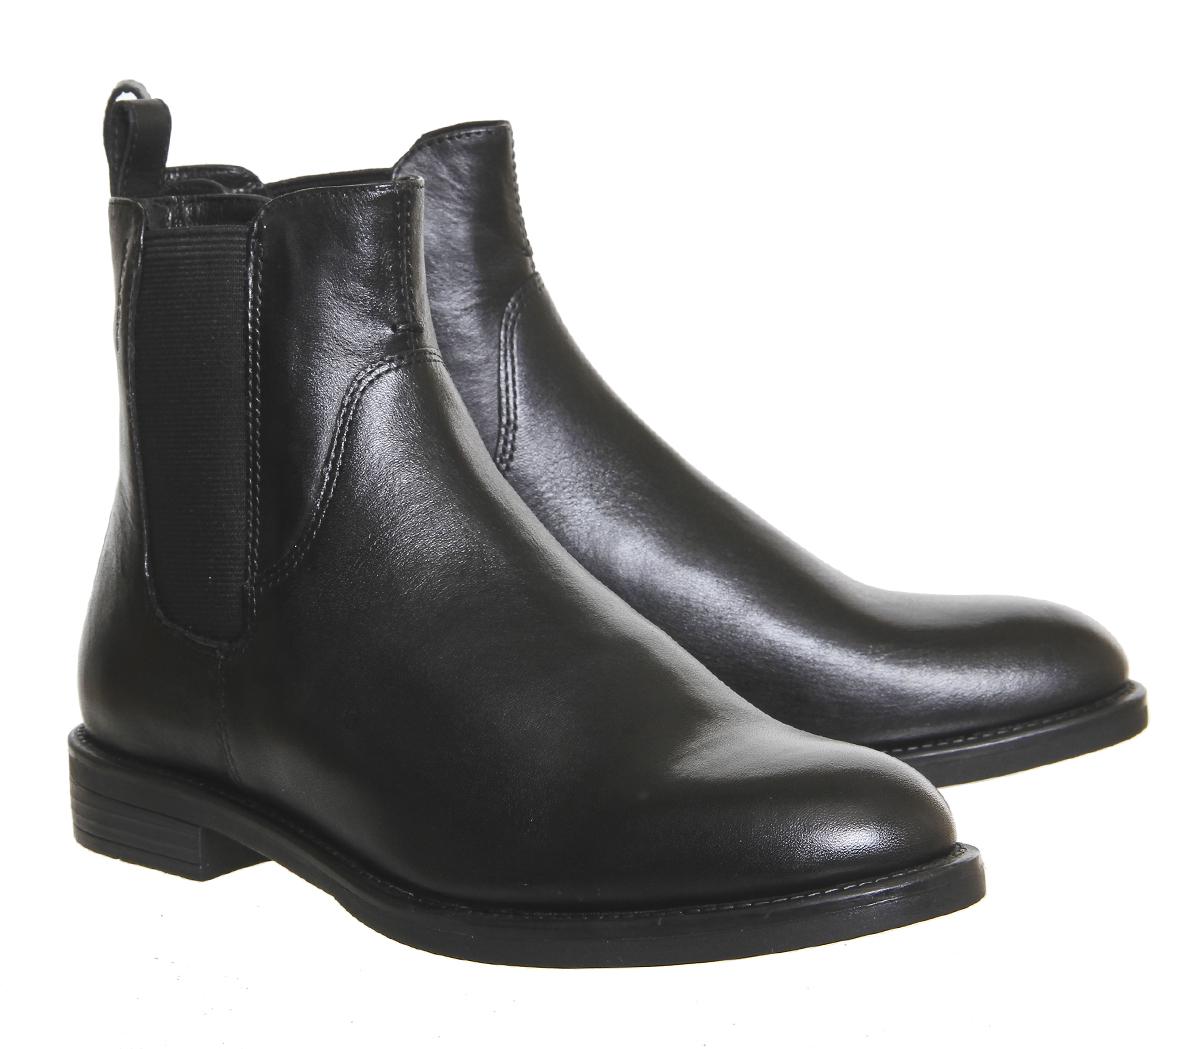 Vagabond Leather Amina Chelsea Boots in Black - Lyst